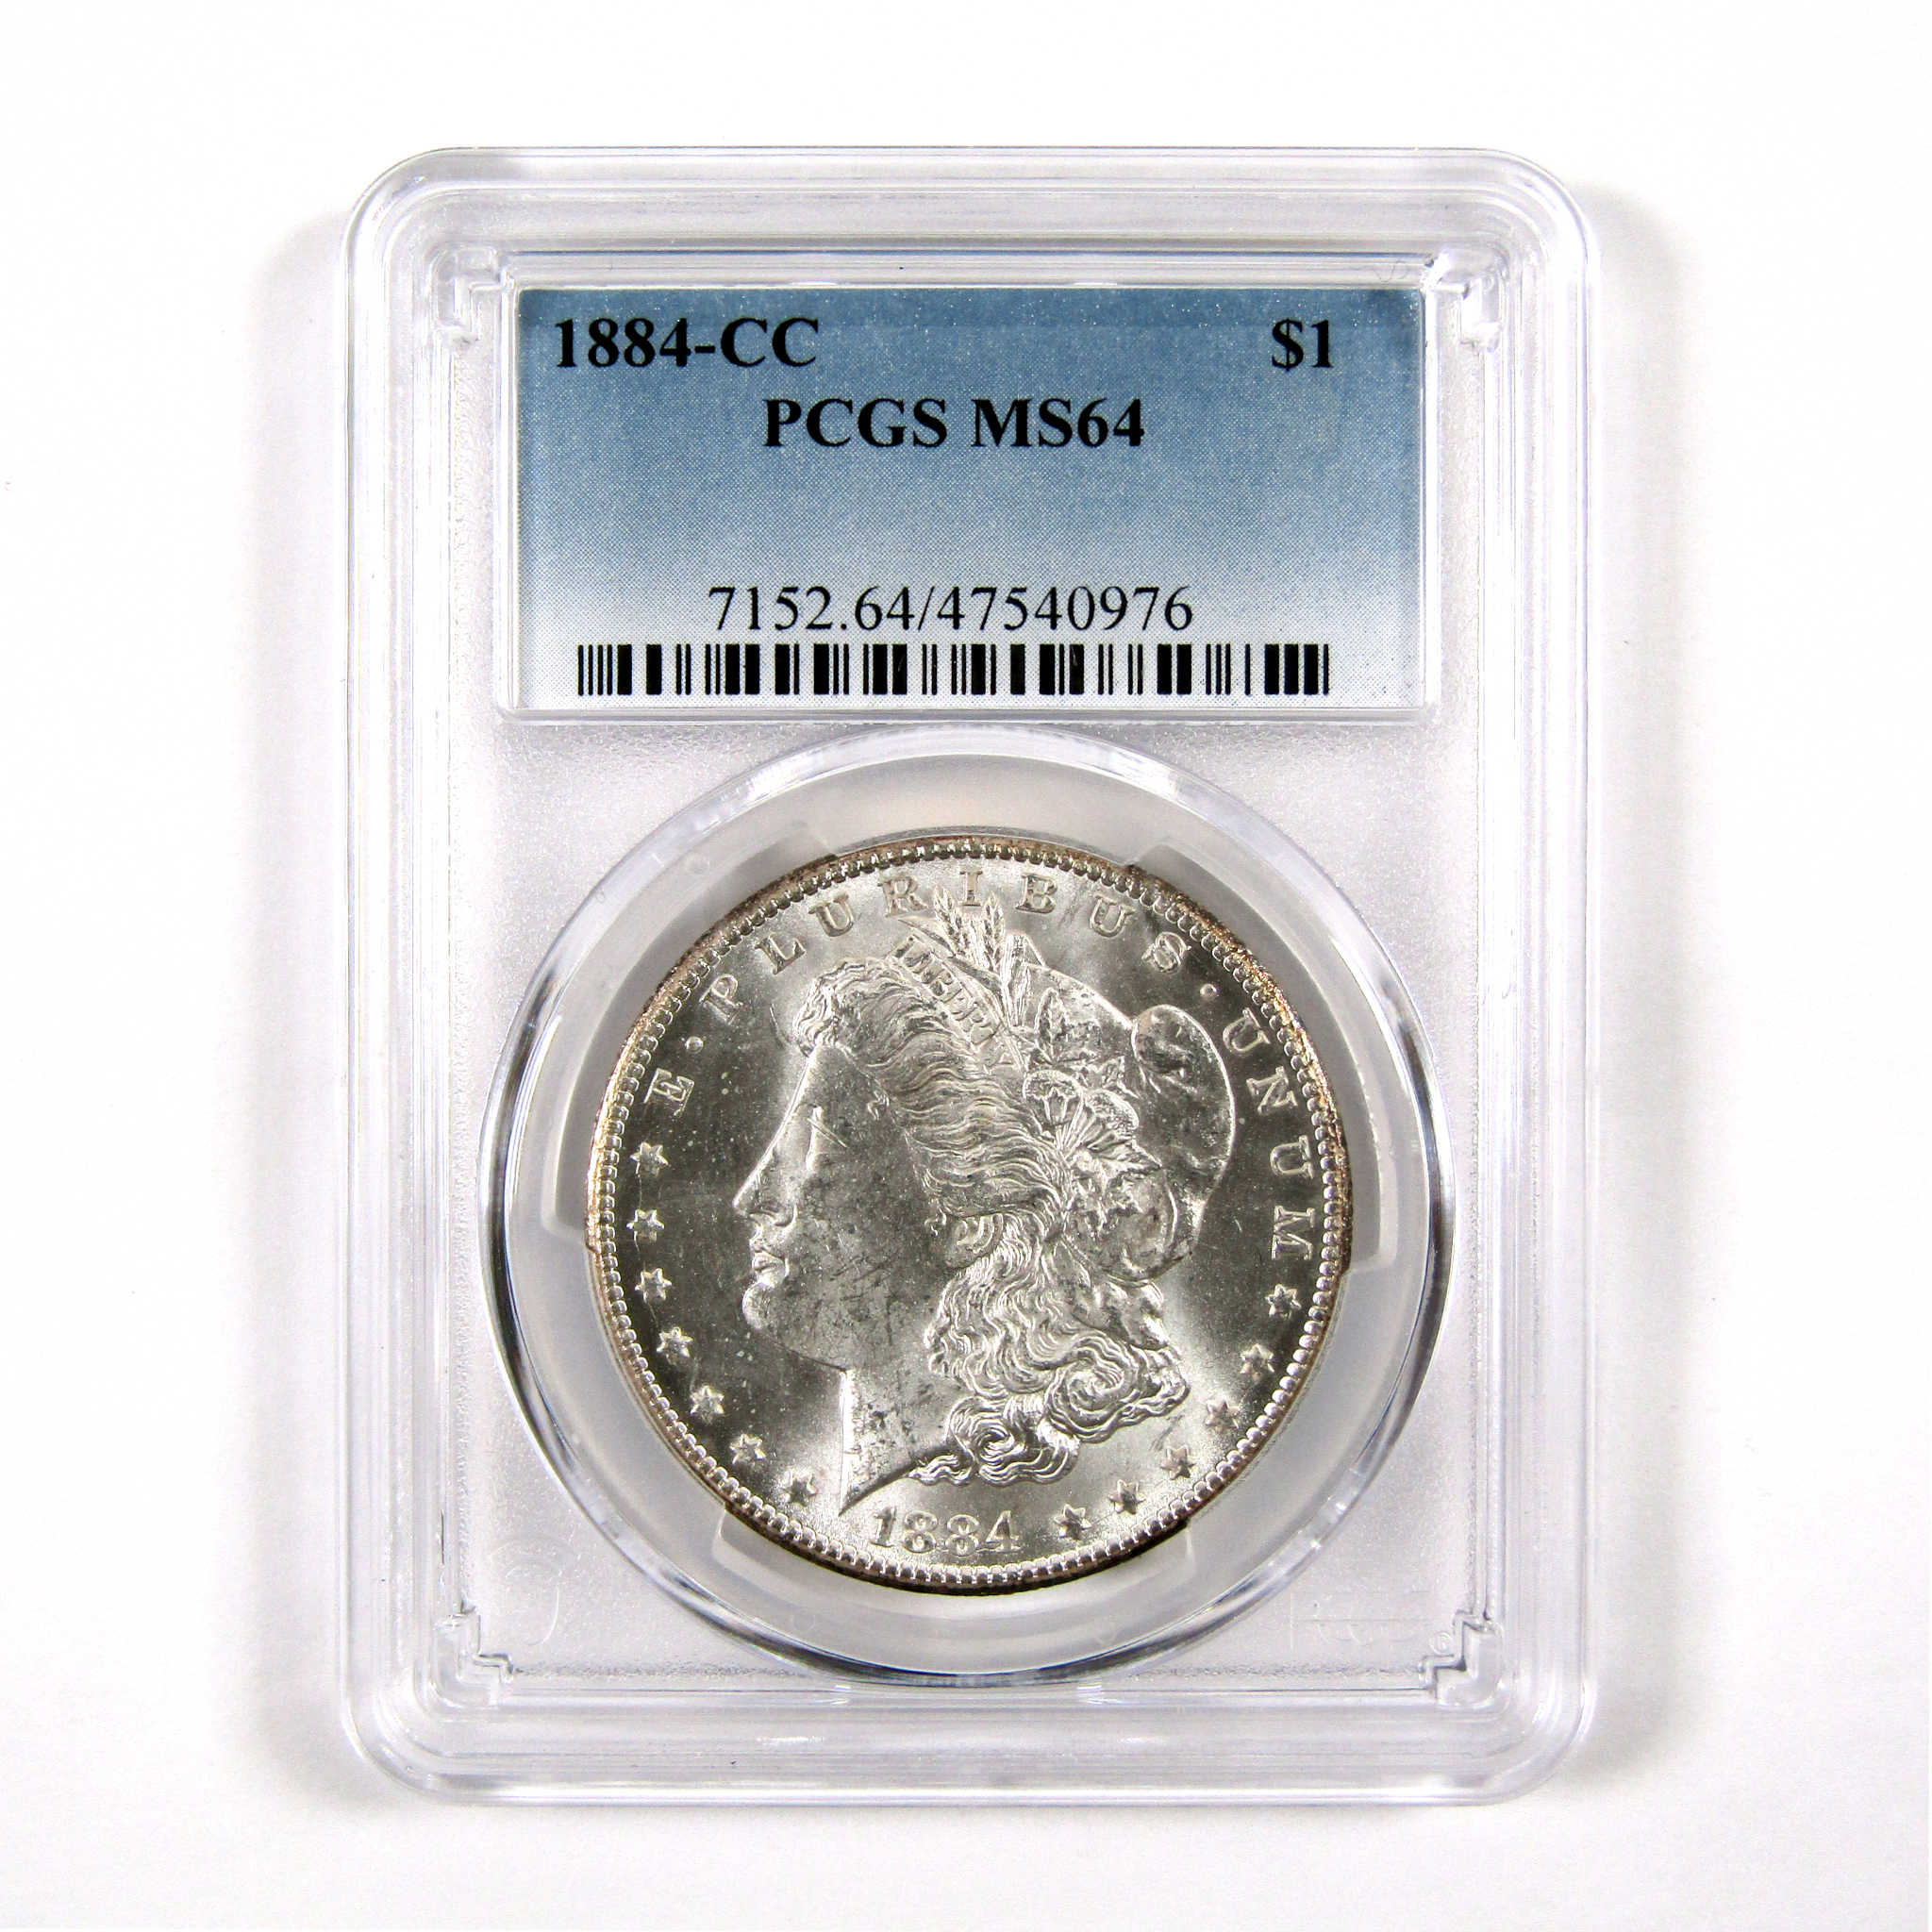 1884 CC Morgan Dollar MS 64 PCGS 90% Silver $1 Unc SKU:I9149 - Morgan coin - Morgan silver dollar - Morgan silver dollar for sale - Profile Coins &amp; Collectibles